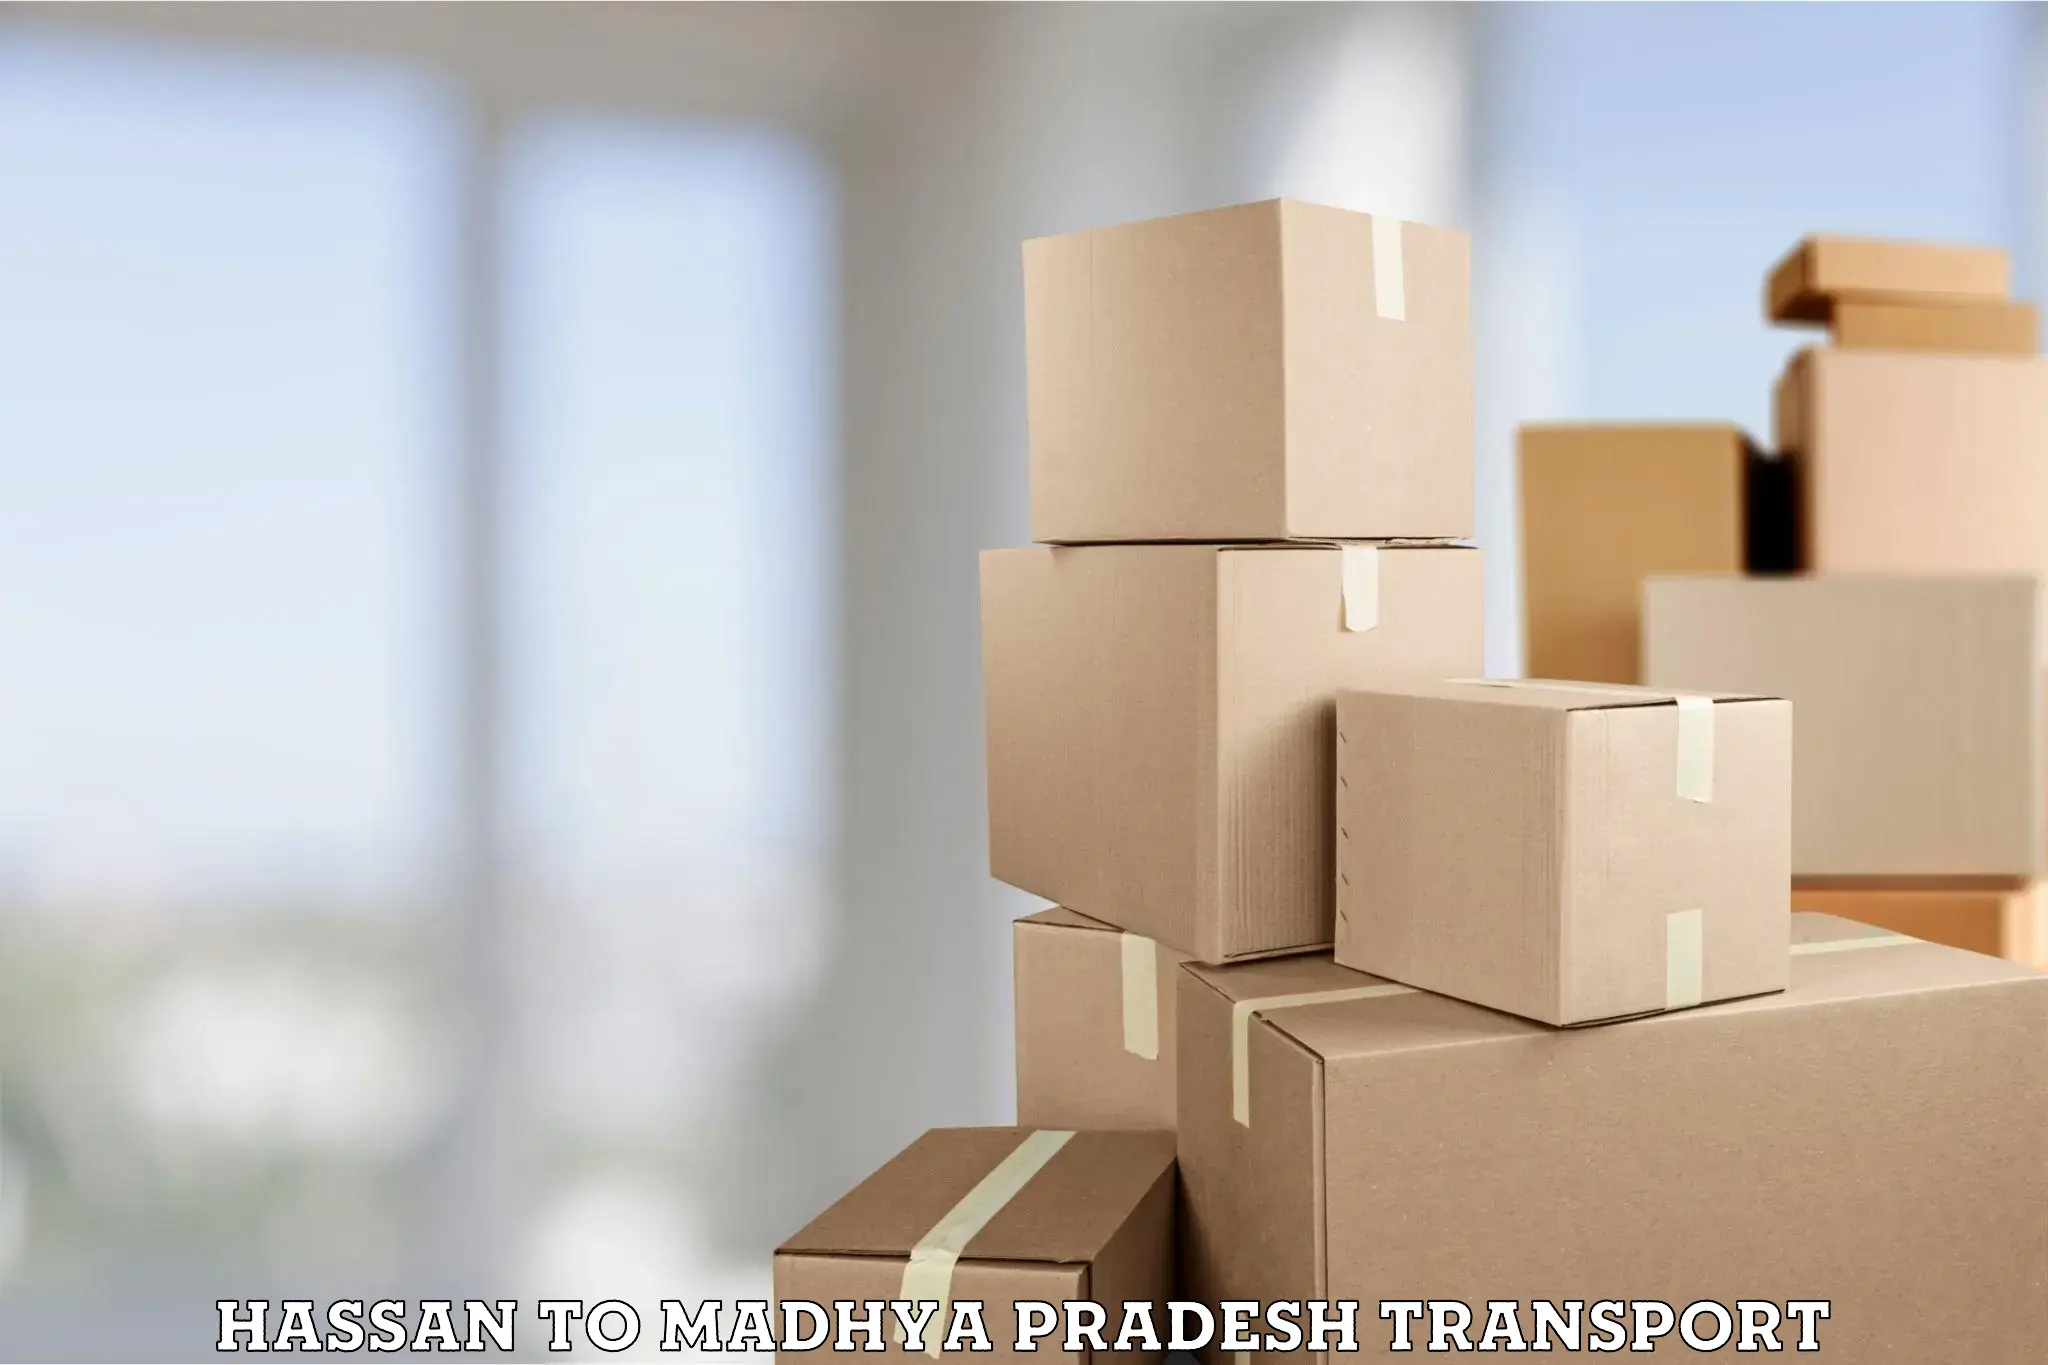 Daily parcel service transport Hassan to Chitrangi